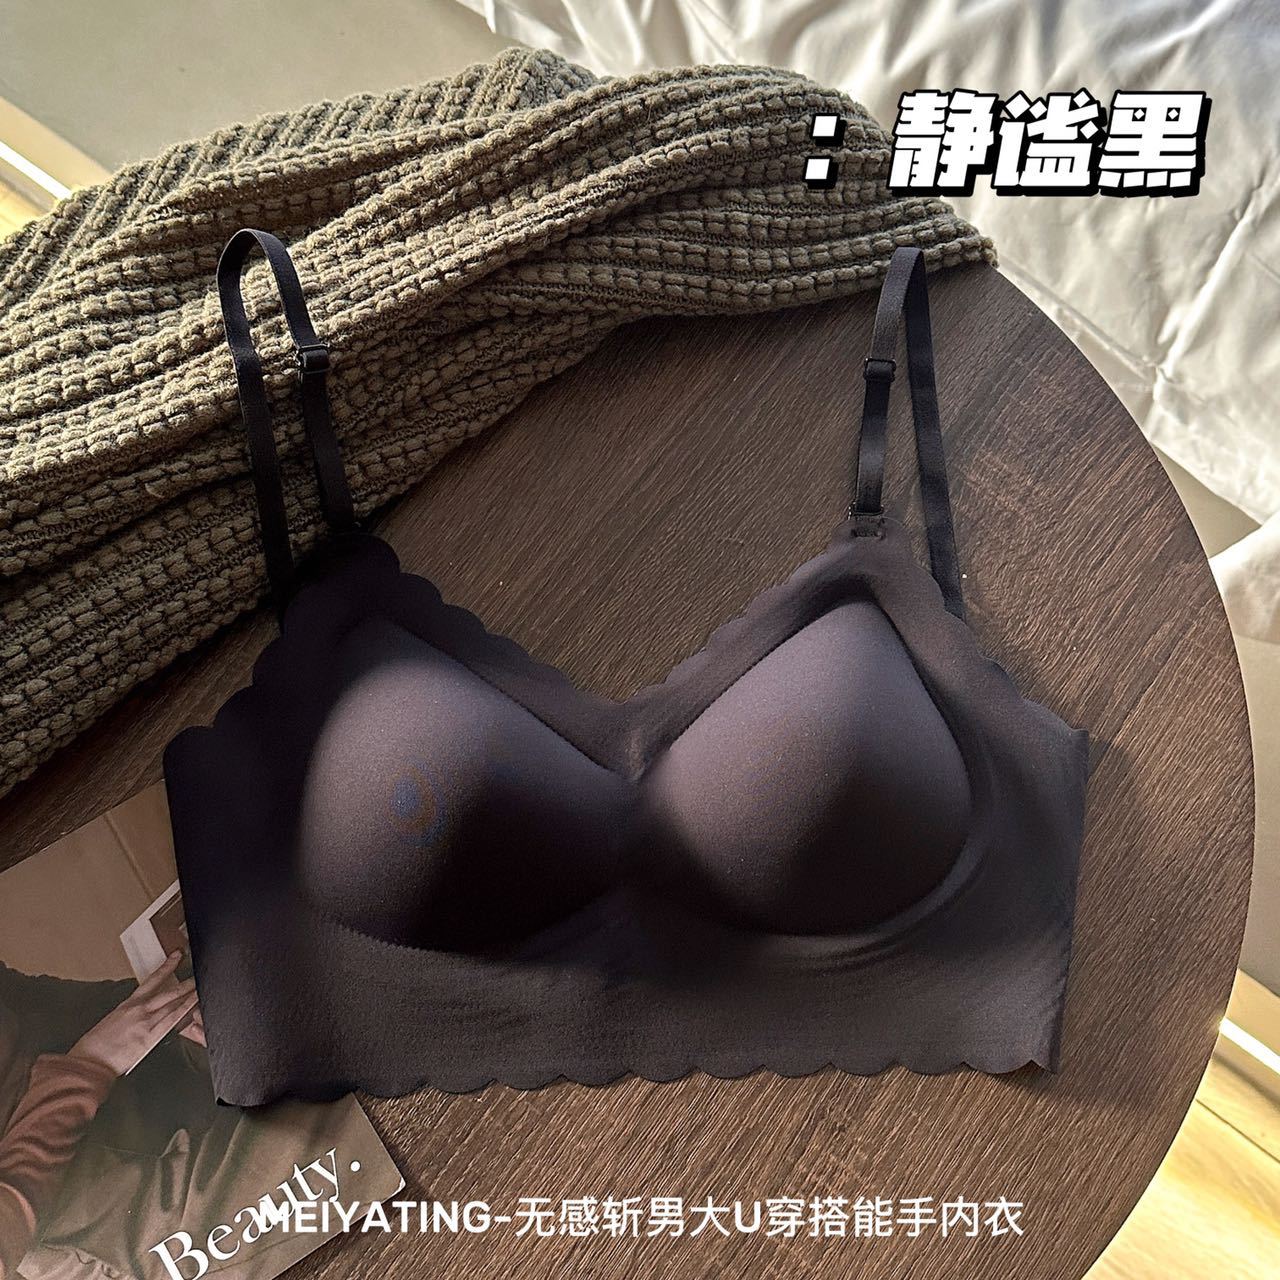 1301# No Feeling Man Attracted Big U Wear Hand-Matching Underwear Seamless 3D Latex Cotton Breast Holding Girl Tank-Top Wrapped Chest Wipe